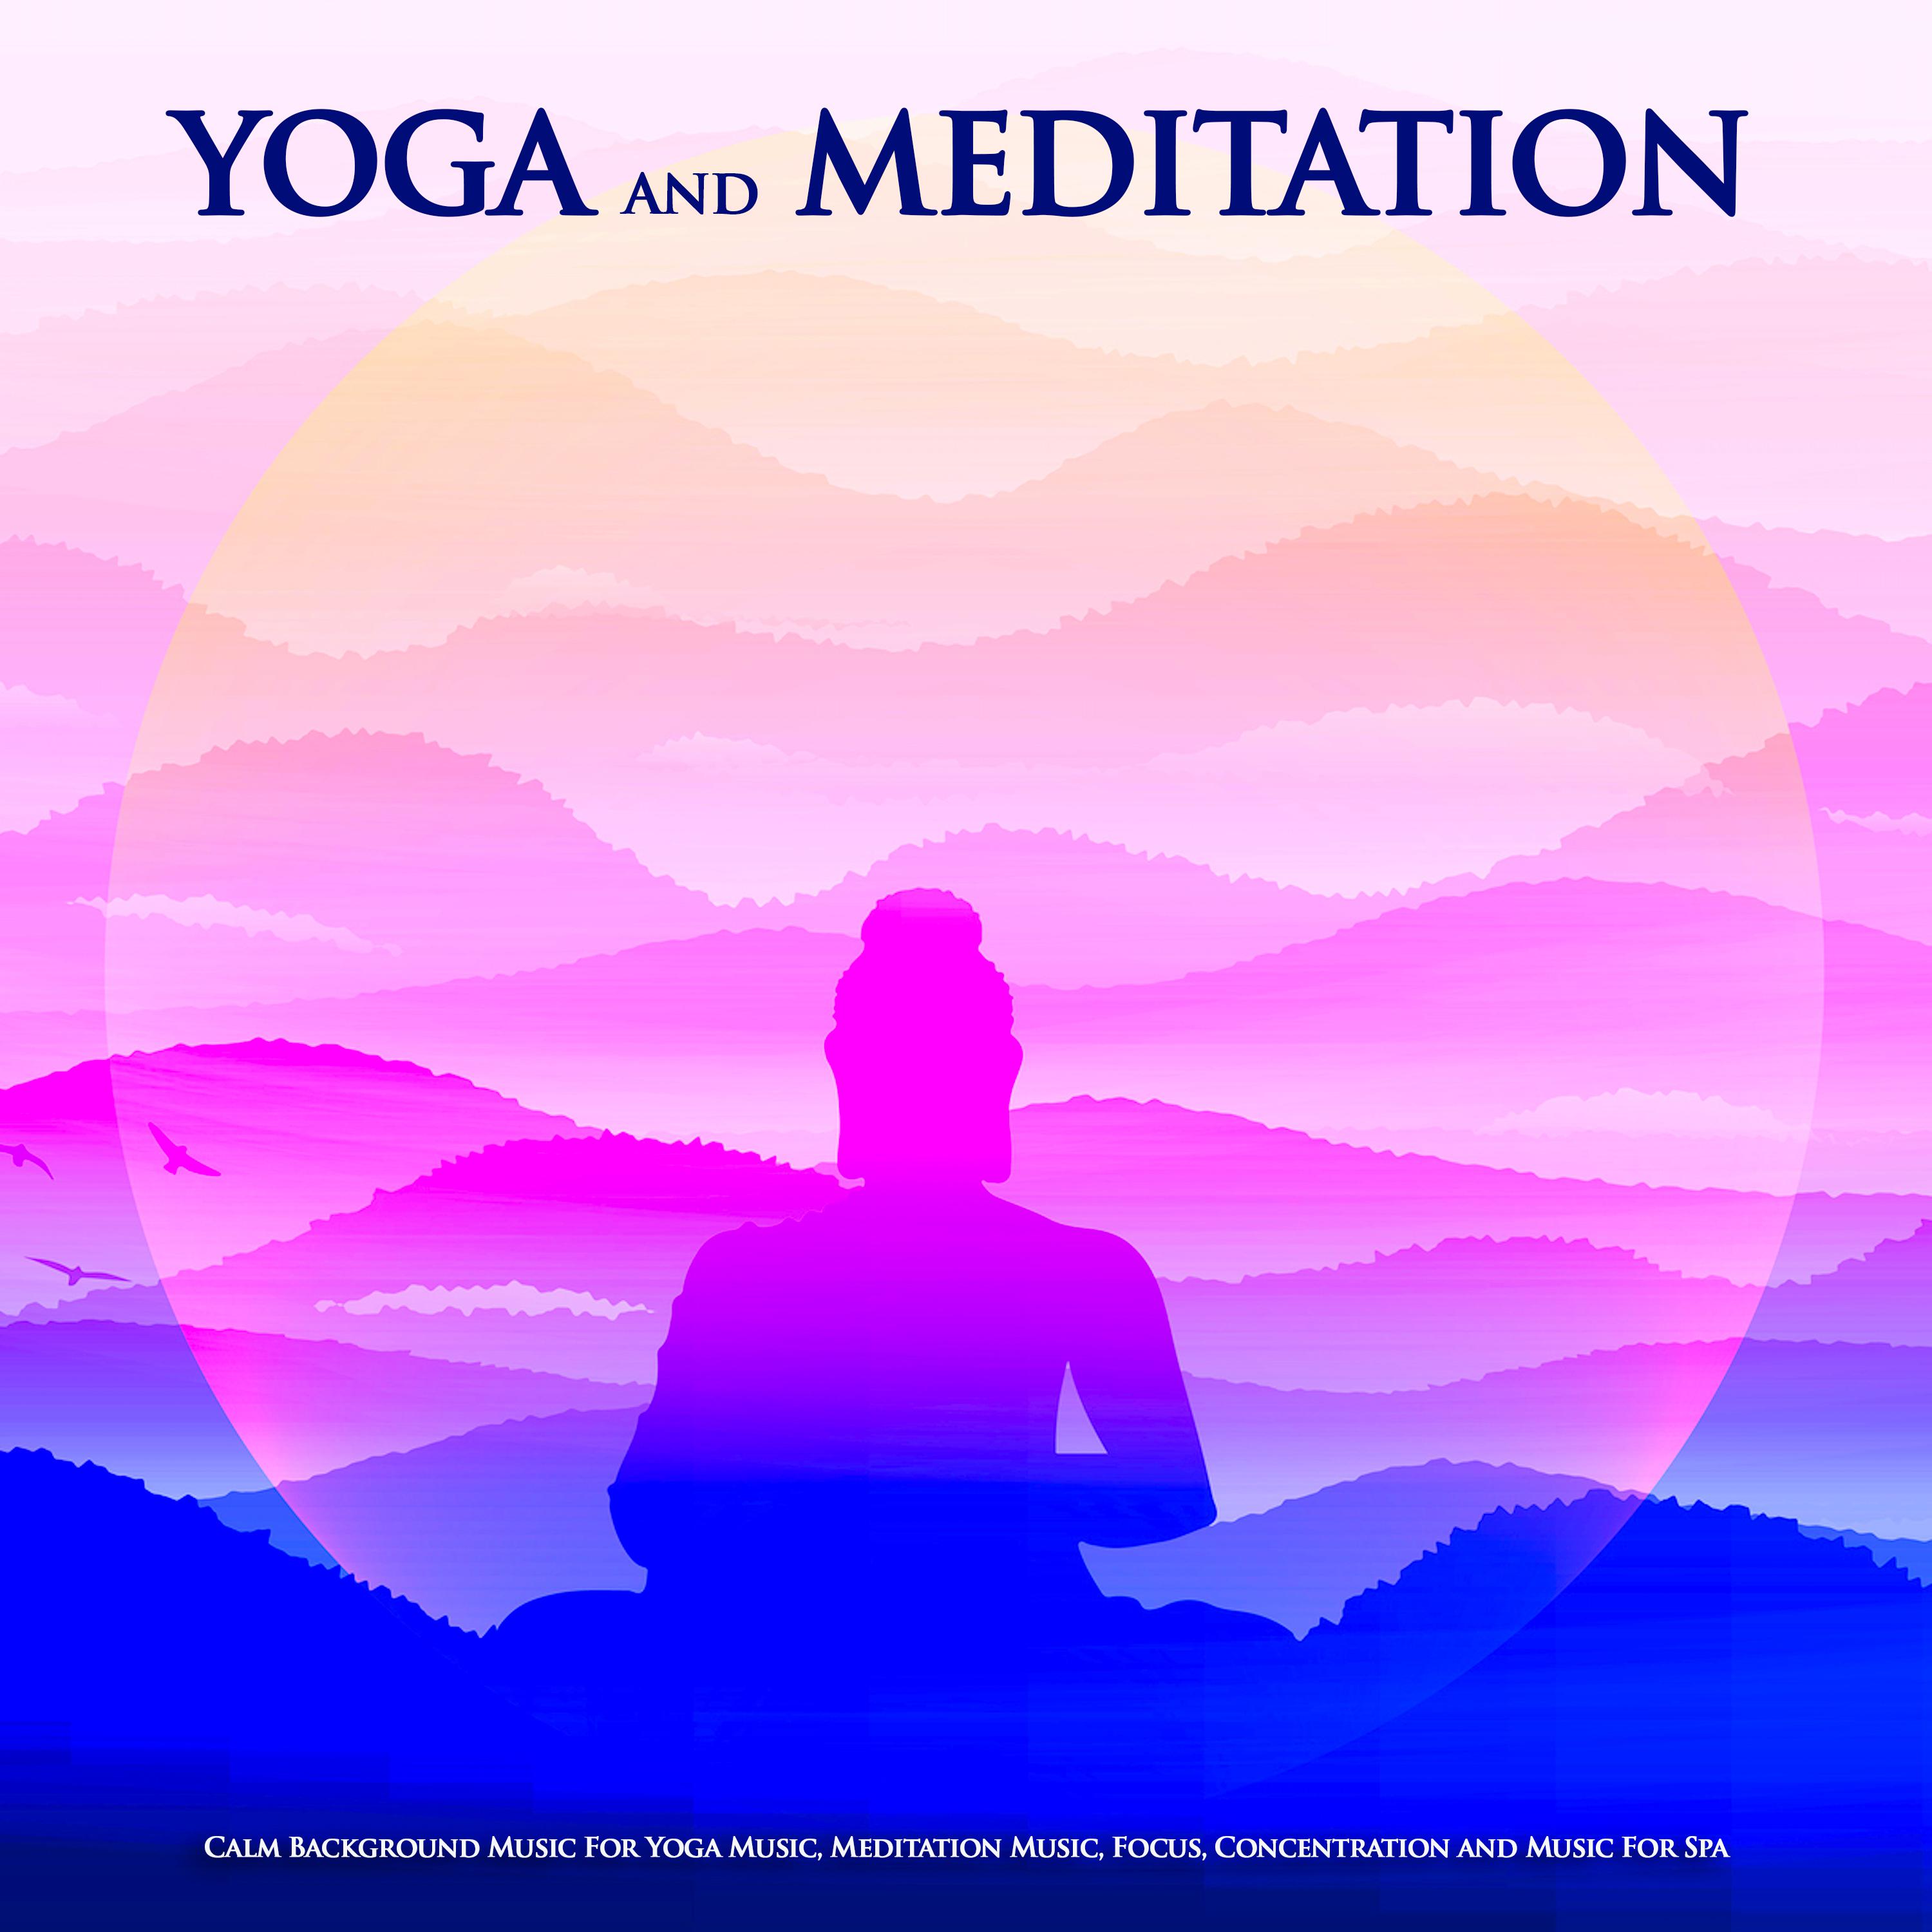 Yoga and Meditation: Calm Background Music For Yoga Music, Meditation Music, Focus, Concentration and Music For Spa